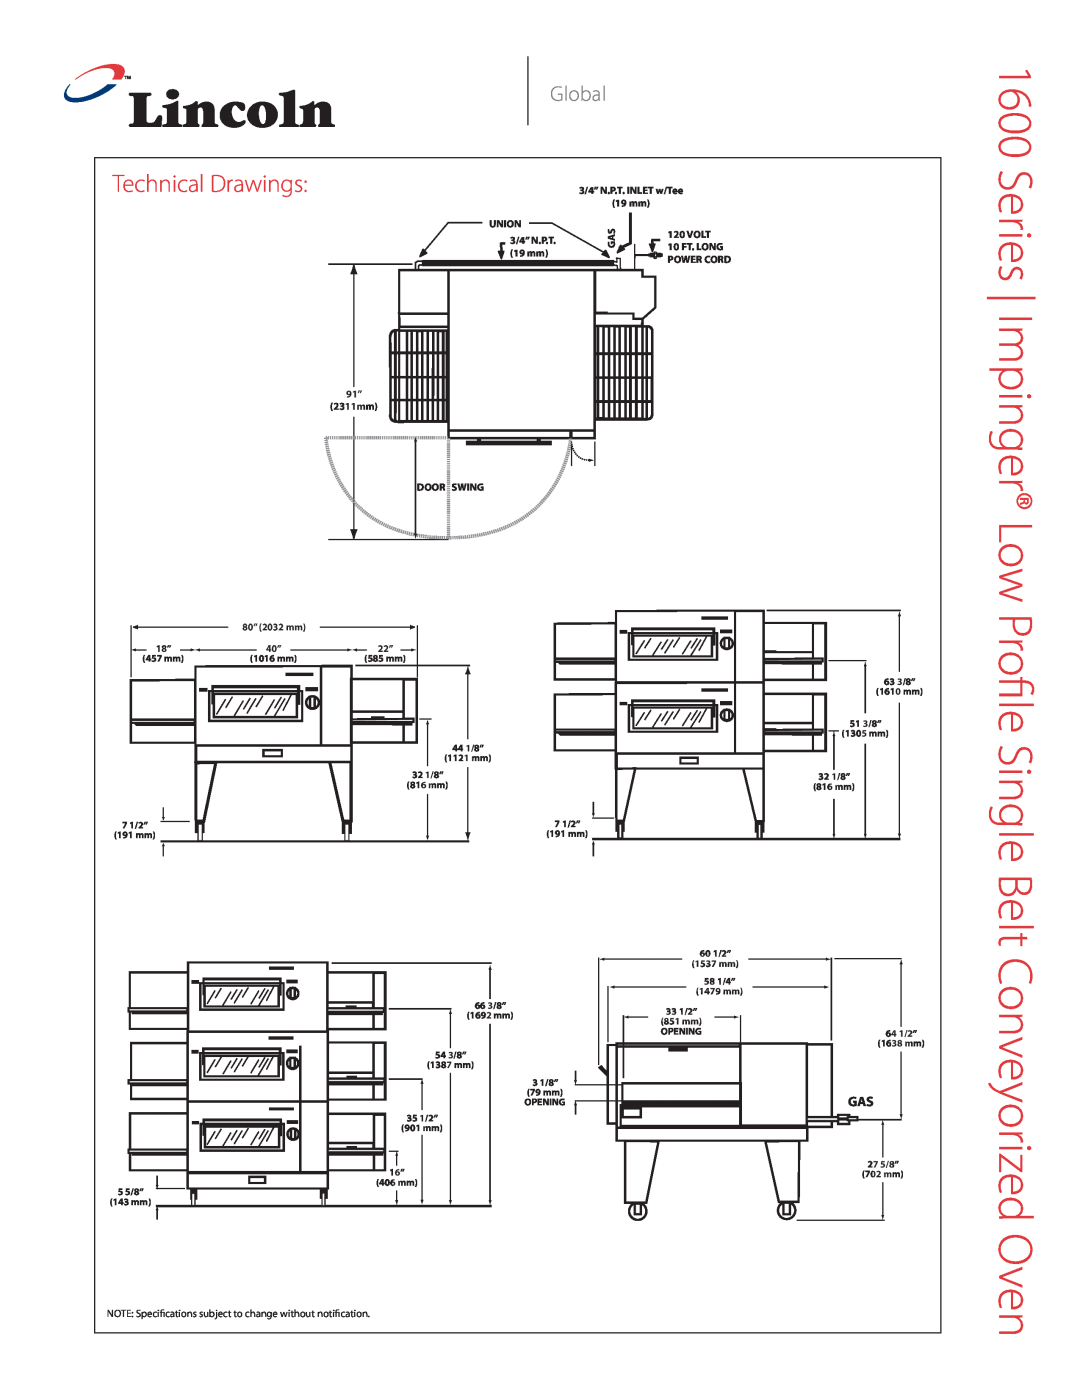 Lincoln 1600 Series Technical Drawings, Global, Union, Volt, 3/4” N.P.T, 10 FT. LONG, 19 mm, 91” 2311mm DOOR SWING 